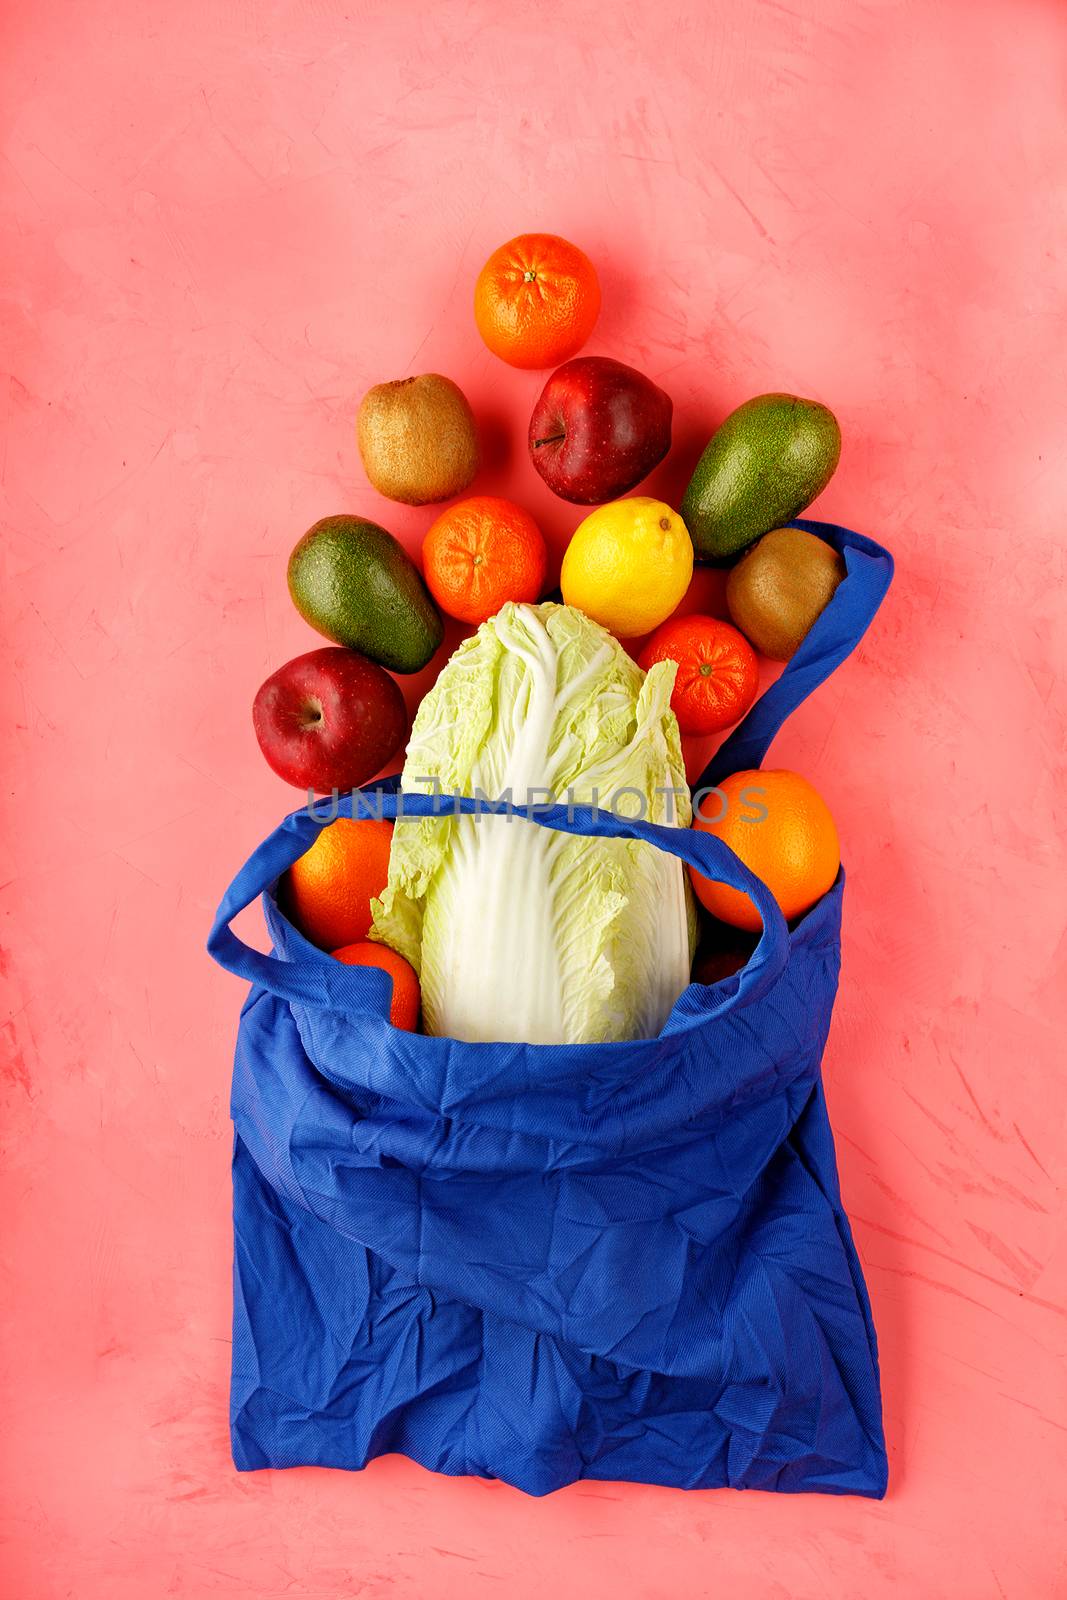 Eco-friendly cotton bag in classic blue color against a pink color background. Zero waste concept, plastic-free, eco-friendly shopping with fruits and vegetables, flat lay.